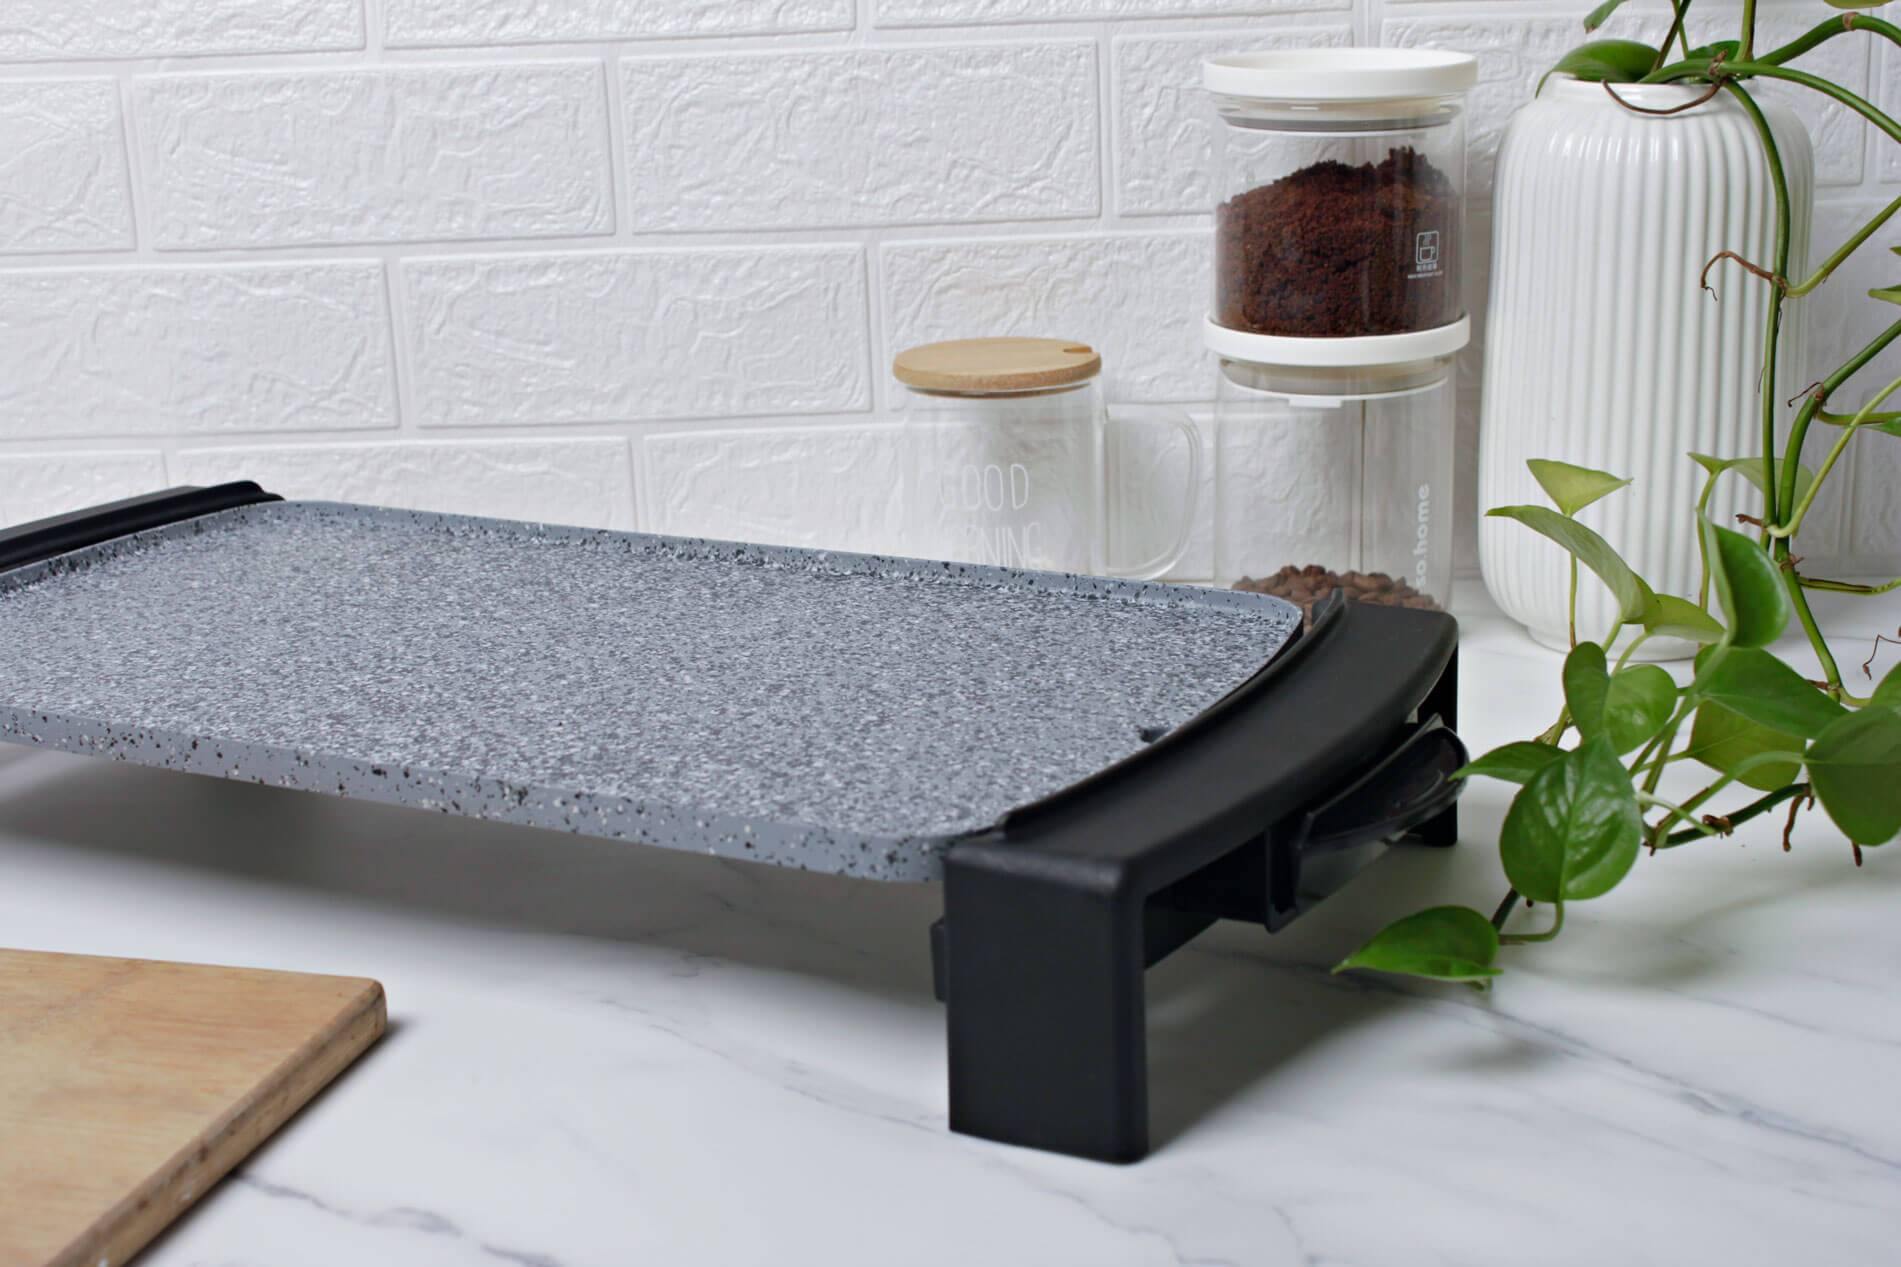 Electric indoor griddle with stone coating